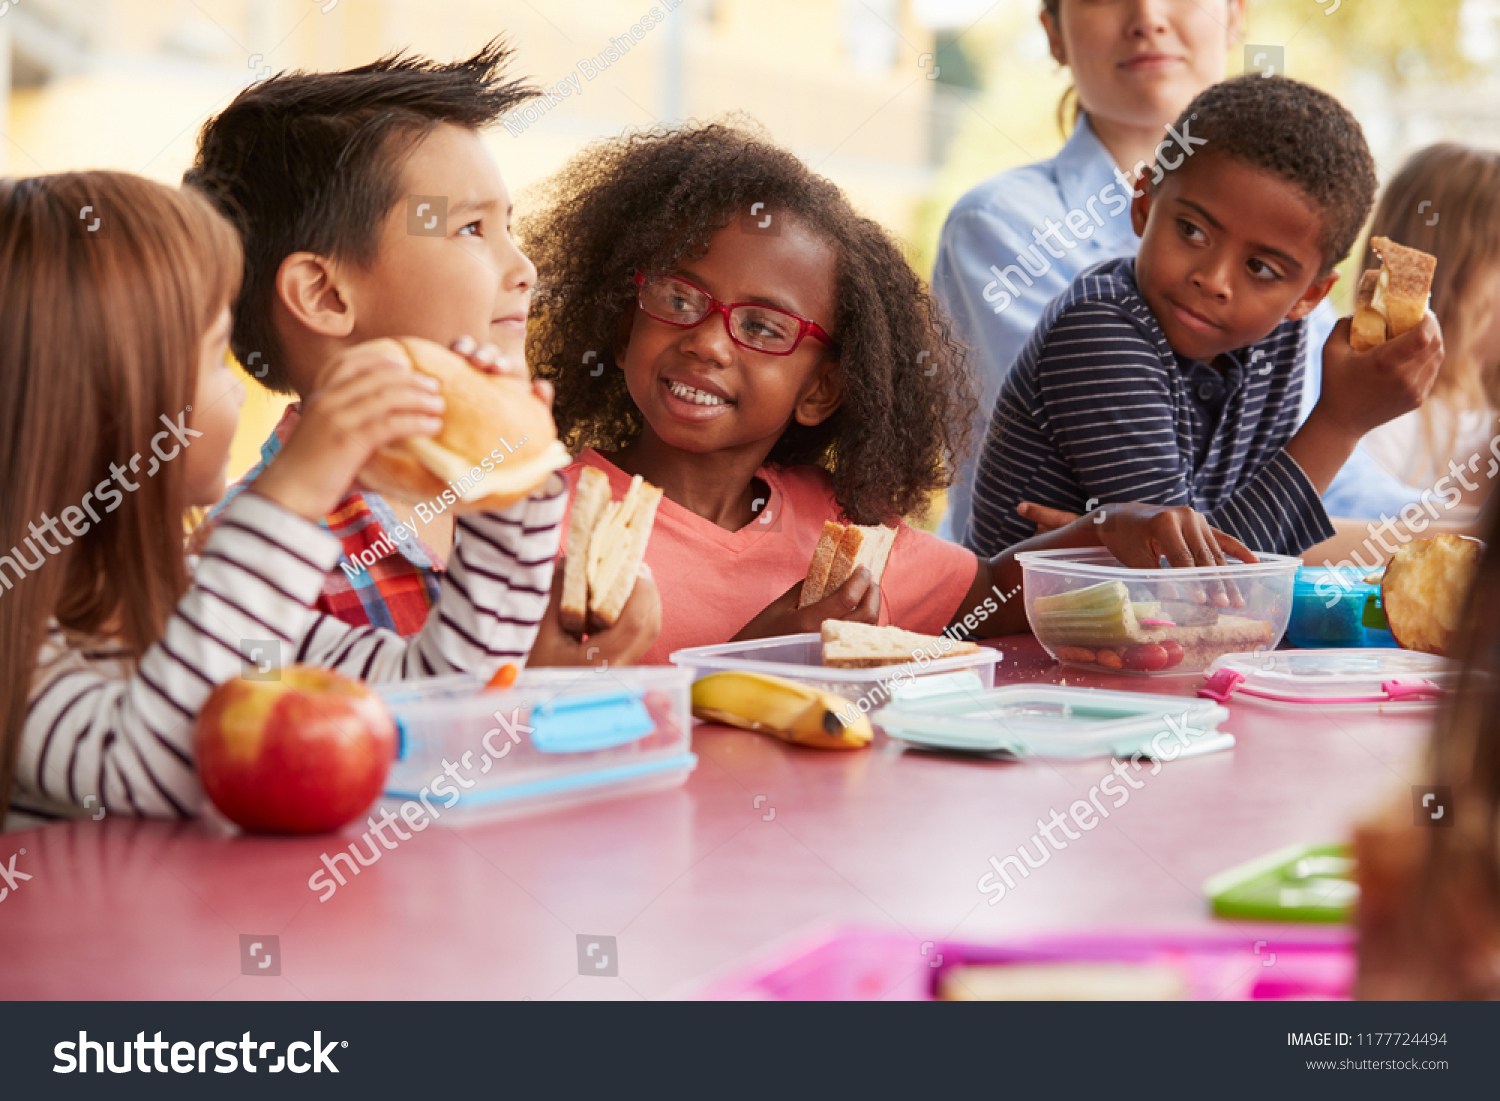 Young school kids eating lunch talking at a table together #1177724494